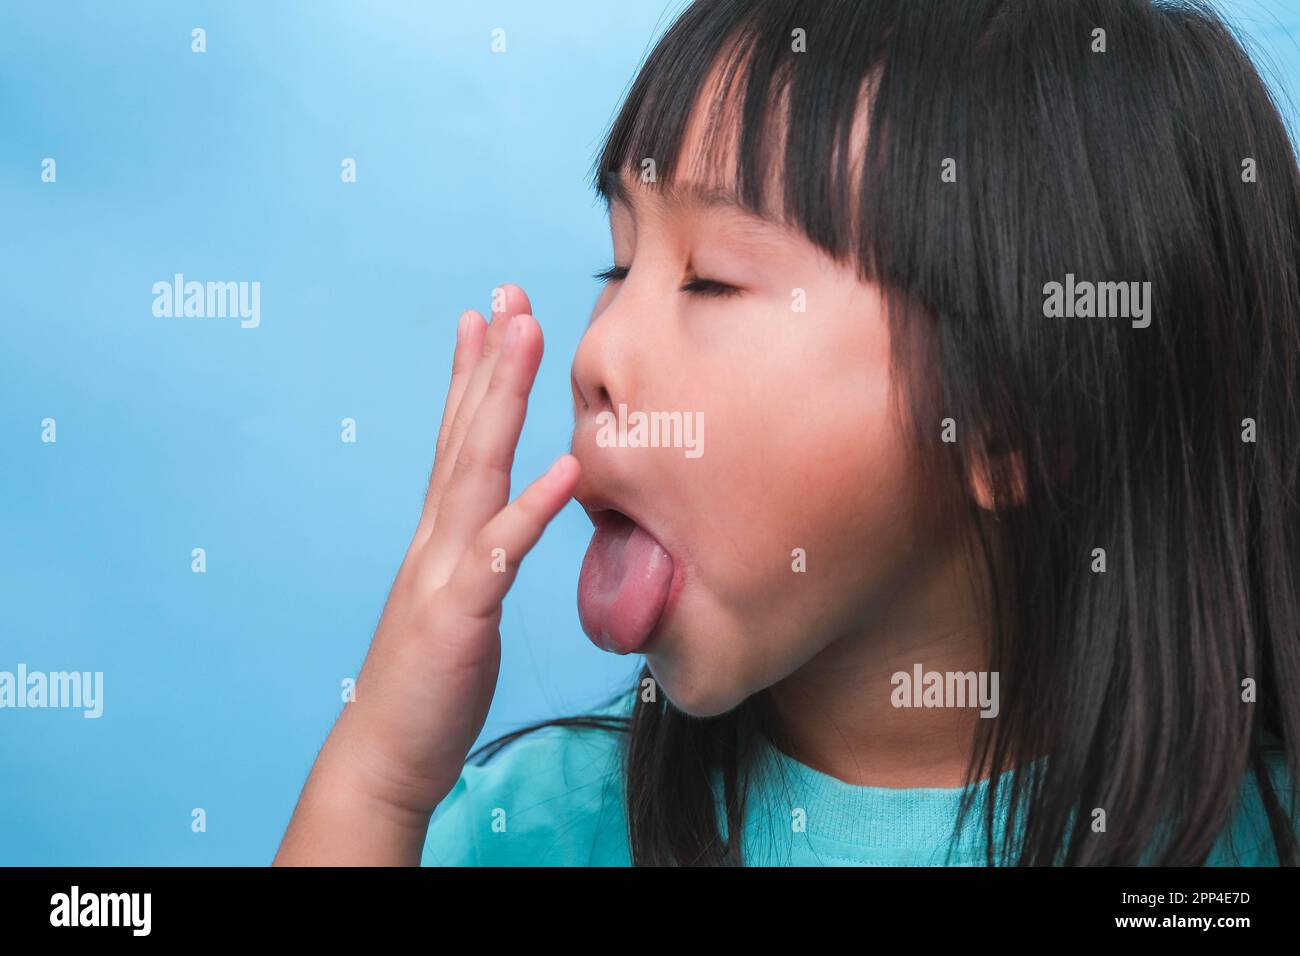 Little asian girl covering her mouth to smell the bad breath. Child girl checking breath with her hands. Oral health problems or dental care concept. Stock Photo